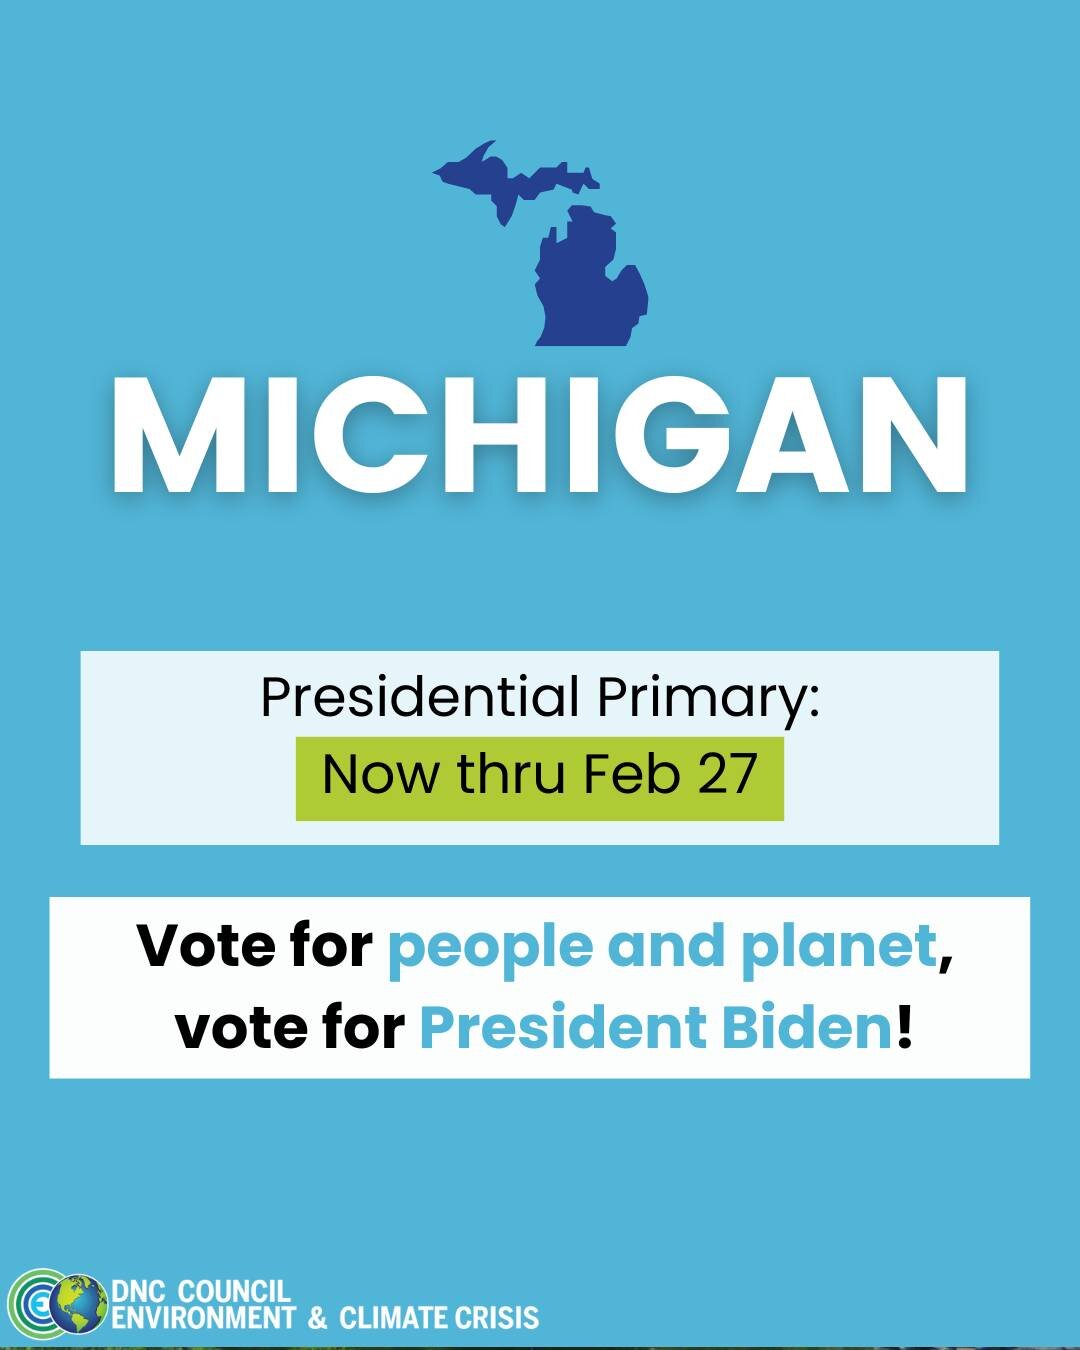 🗳️ Early voting for the Presidential primary has already started in Michigan! The last day to vote is Feb 27.

💙 Vote early, vote for climate, vote President Biden!

Find voting information here: IWillVote.com
.
.
.
.
#voteearly #michigan #puremich